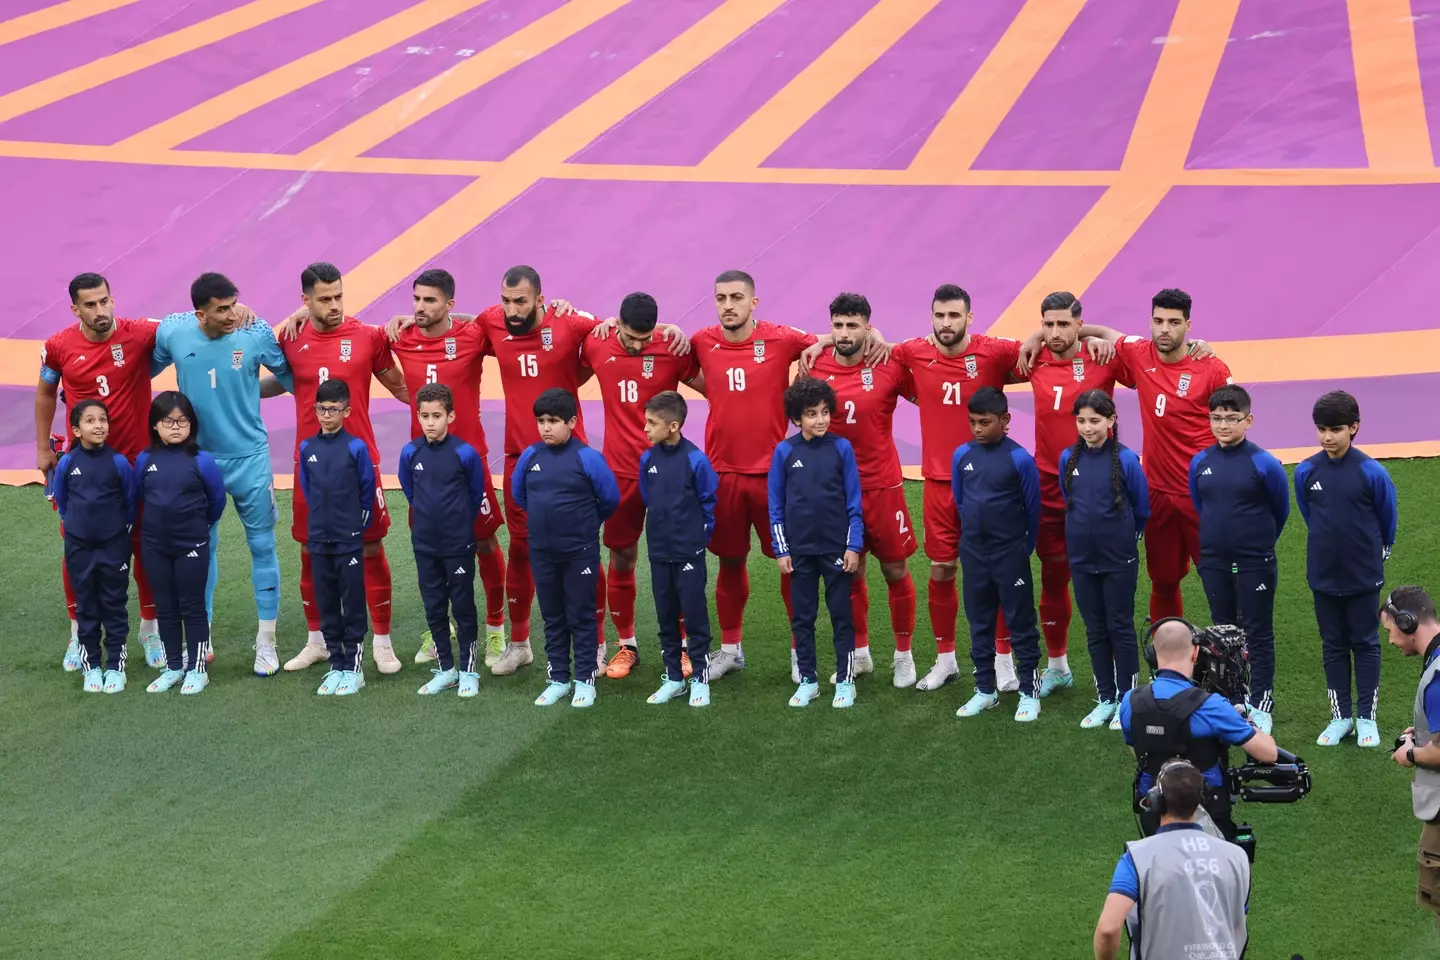 The players stood in silence during the national anthem.